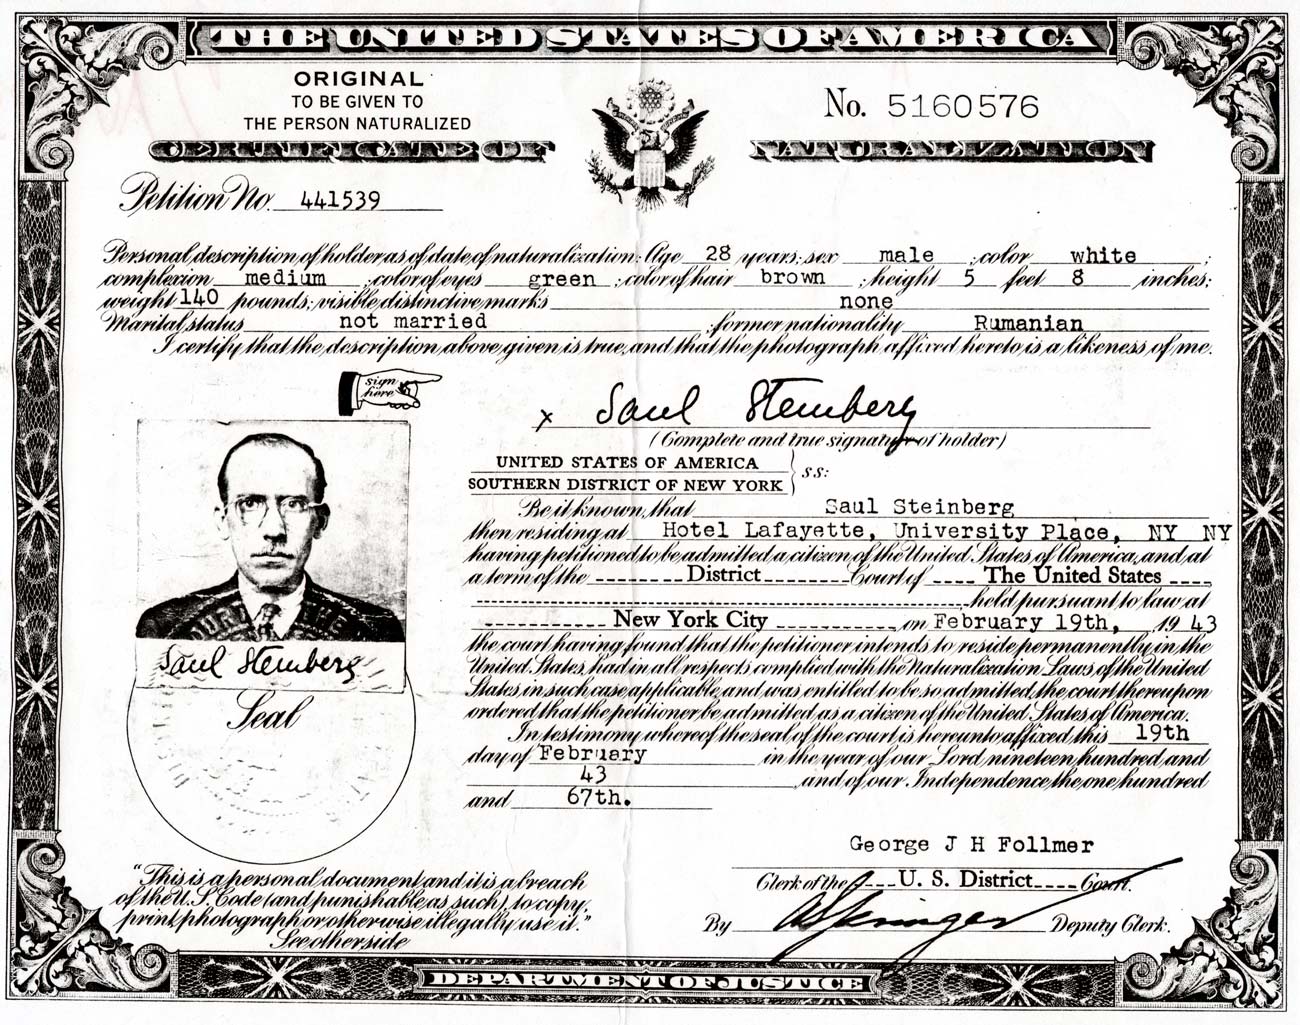 Steinberg’s certificate of naturalization dated February 19, 1943. Saul Steinberg Papers, Beinecke Rare Book and Manuscript Library, Yale University.